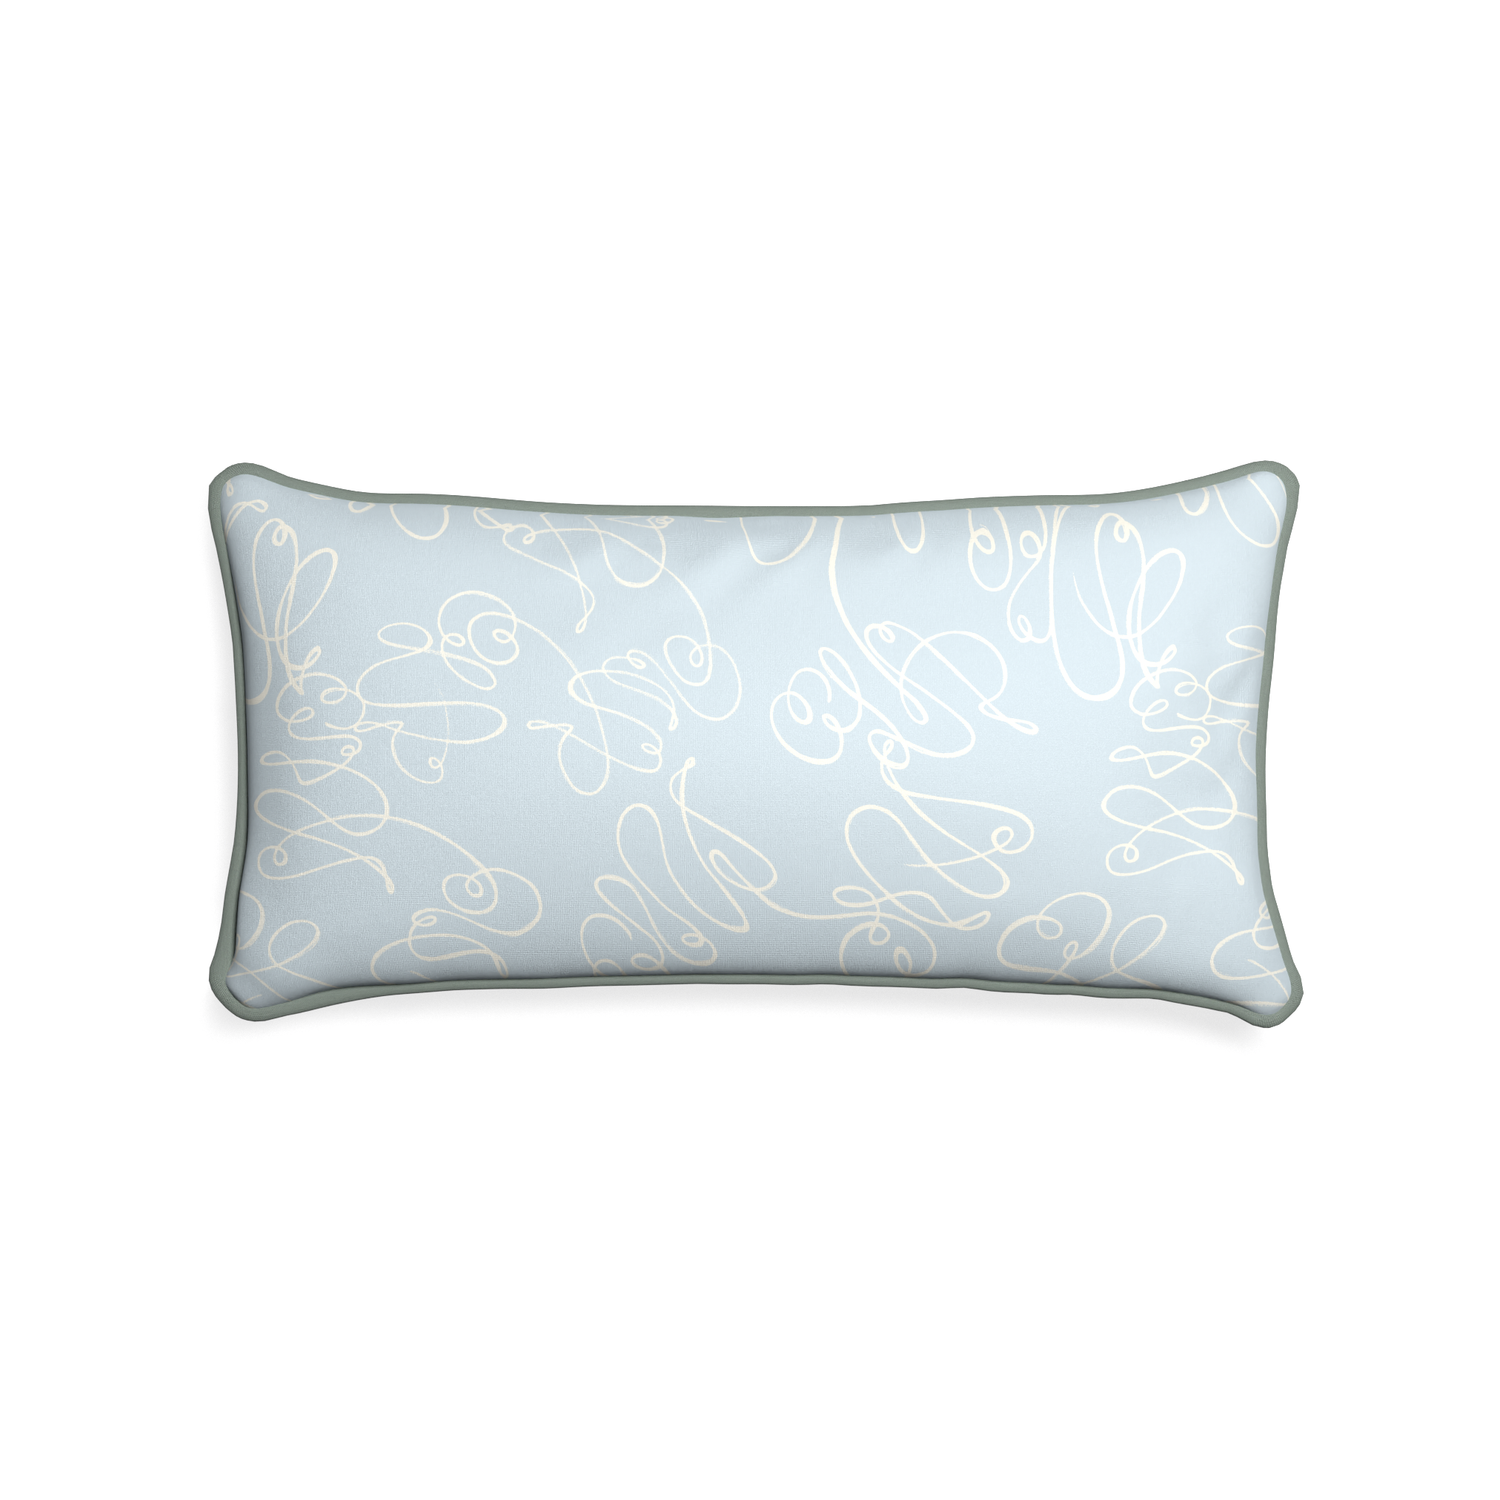 Midi-lumbar mirabella custom powder blue abstractpillow with sage piping on white background